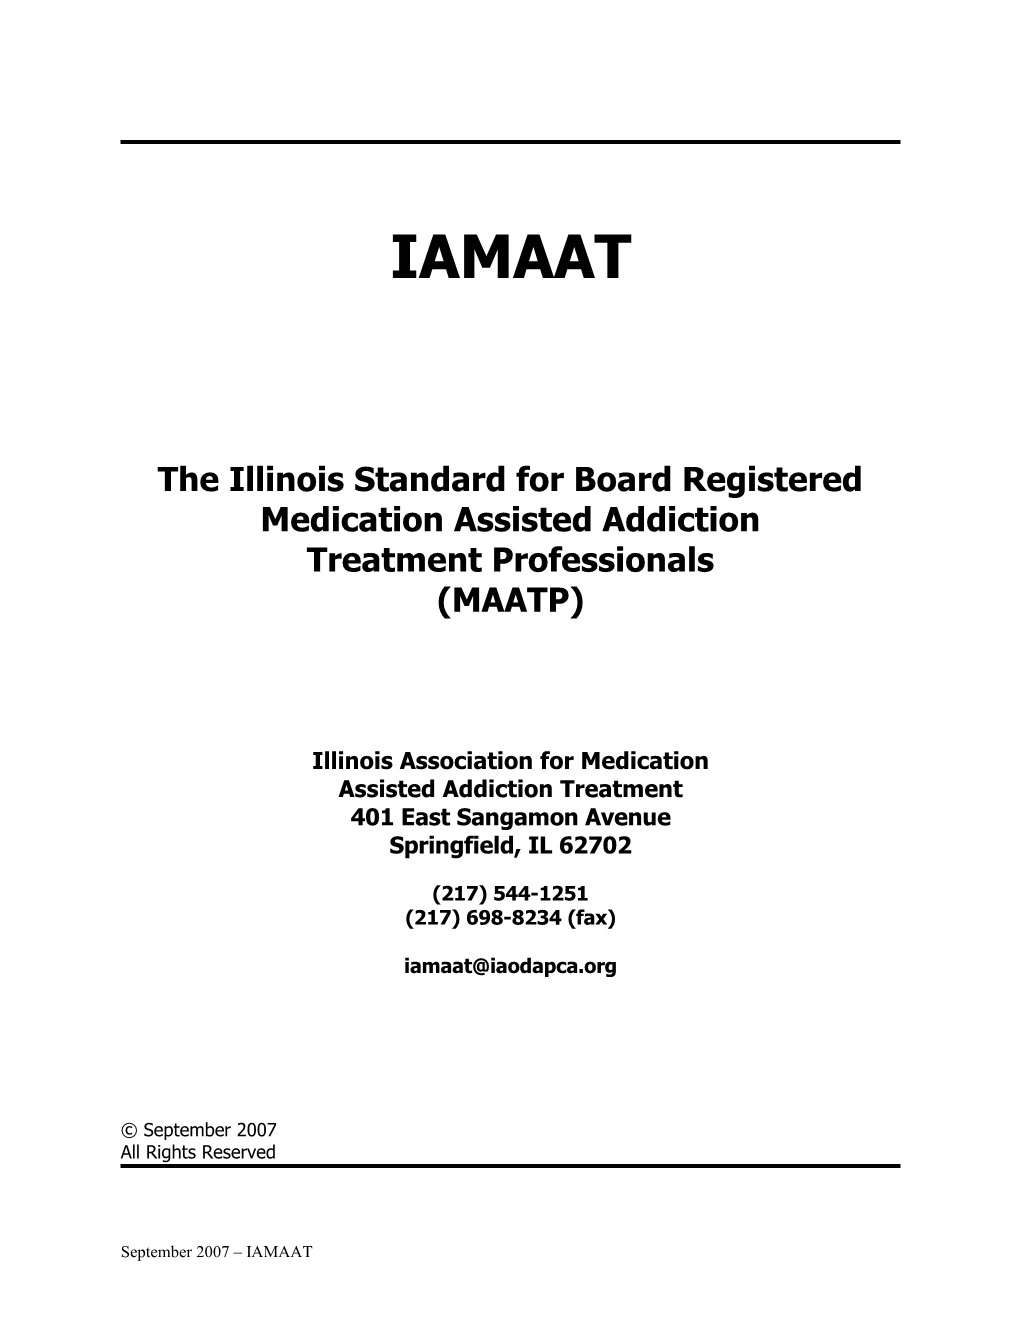 The Illinois Standard for Board Registered